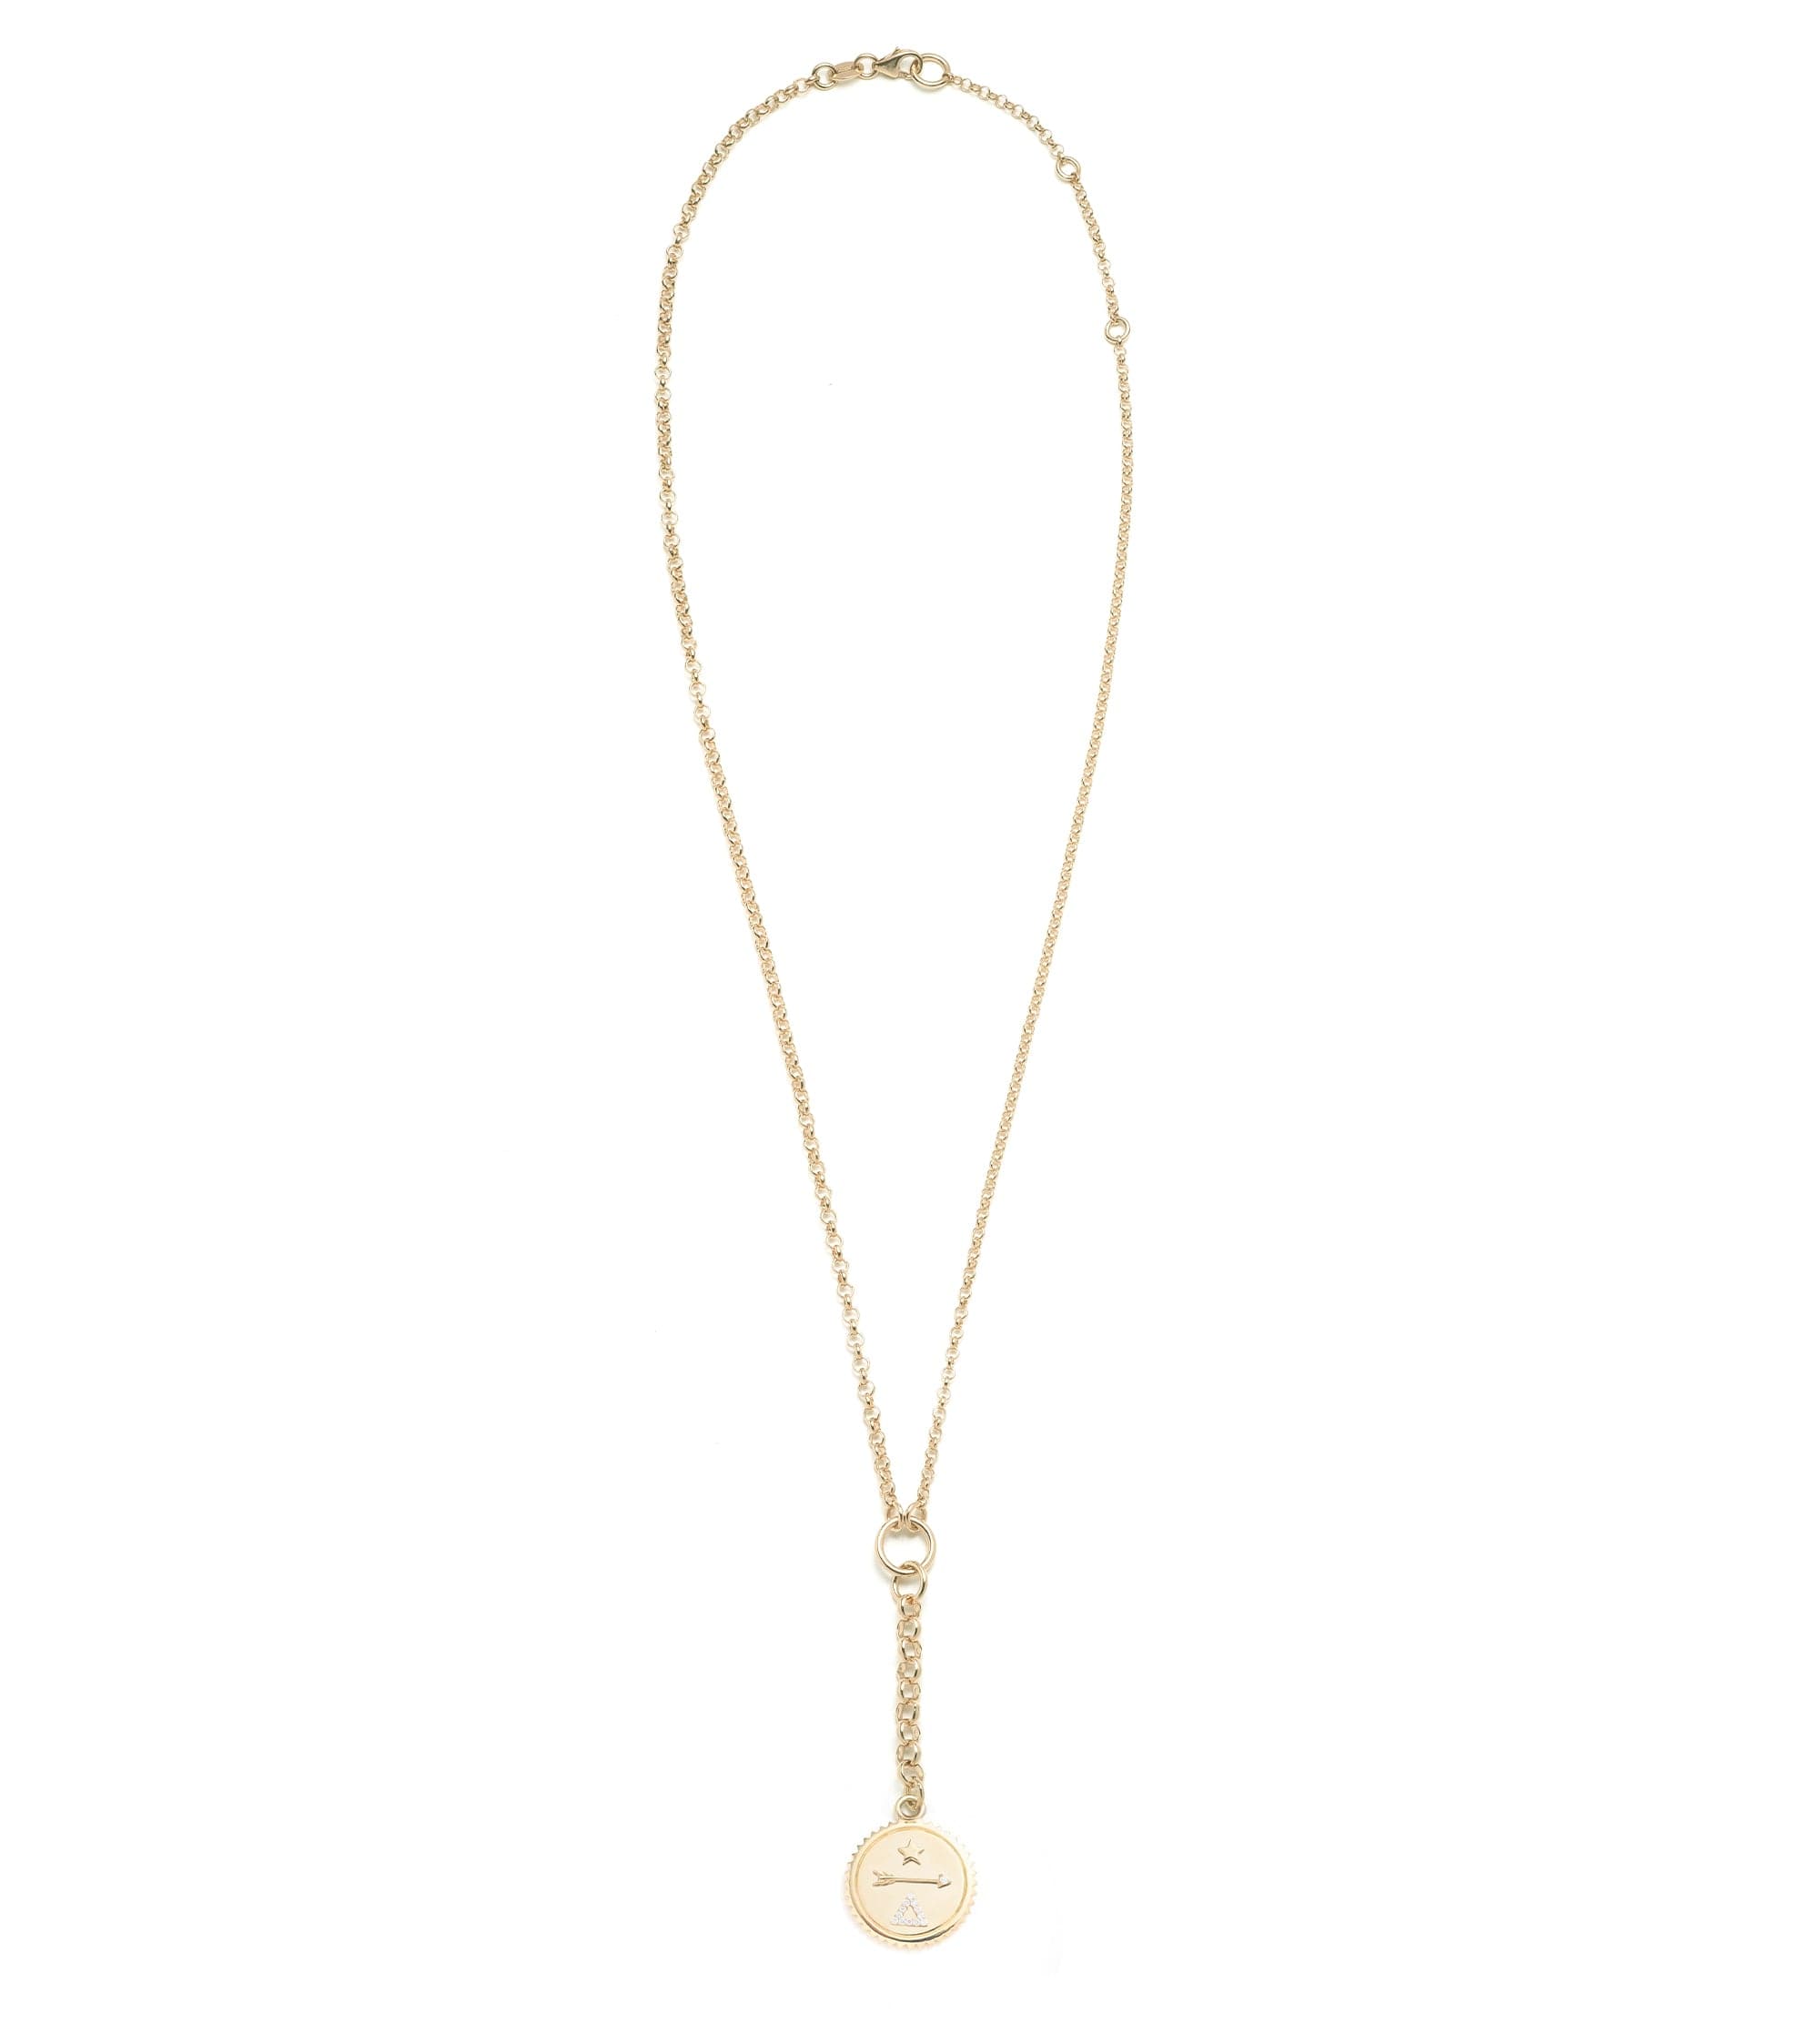 Dream : Small Mixed Belcher Extension Chain Necklace